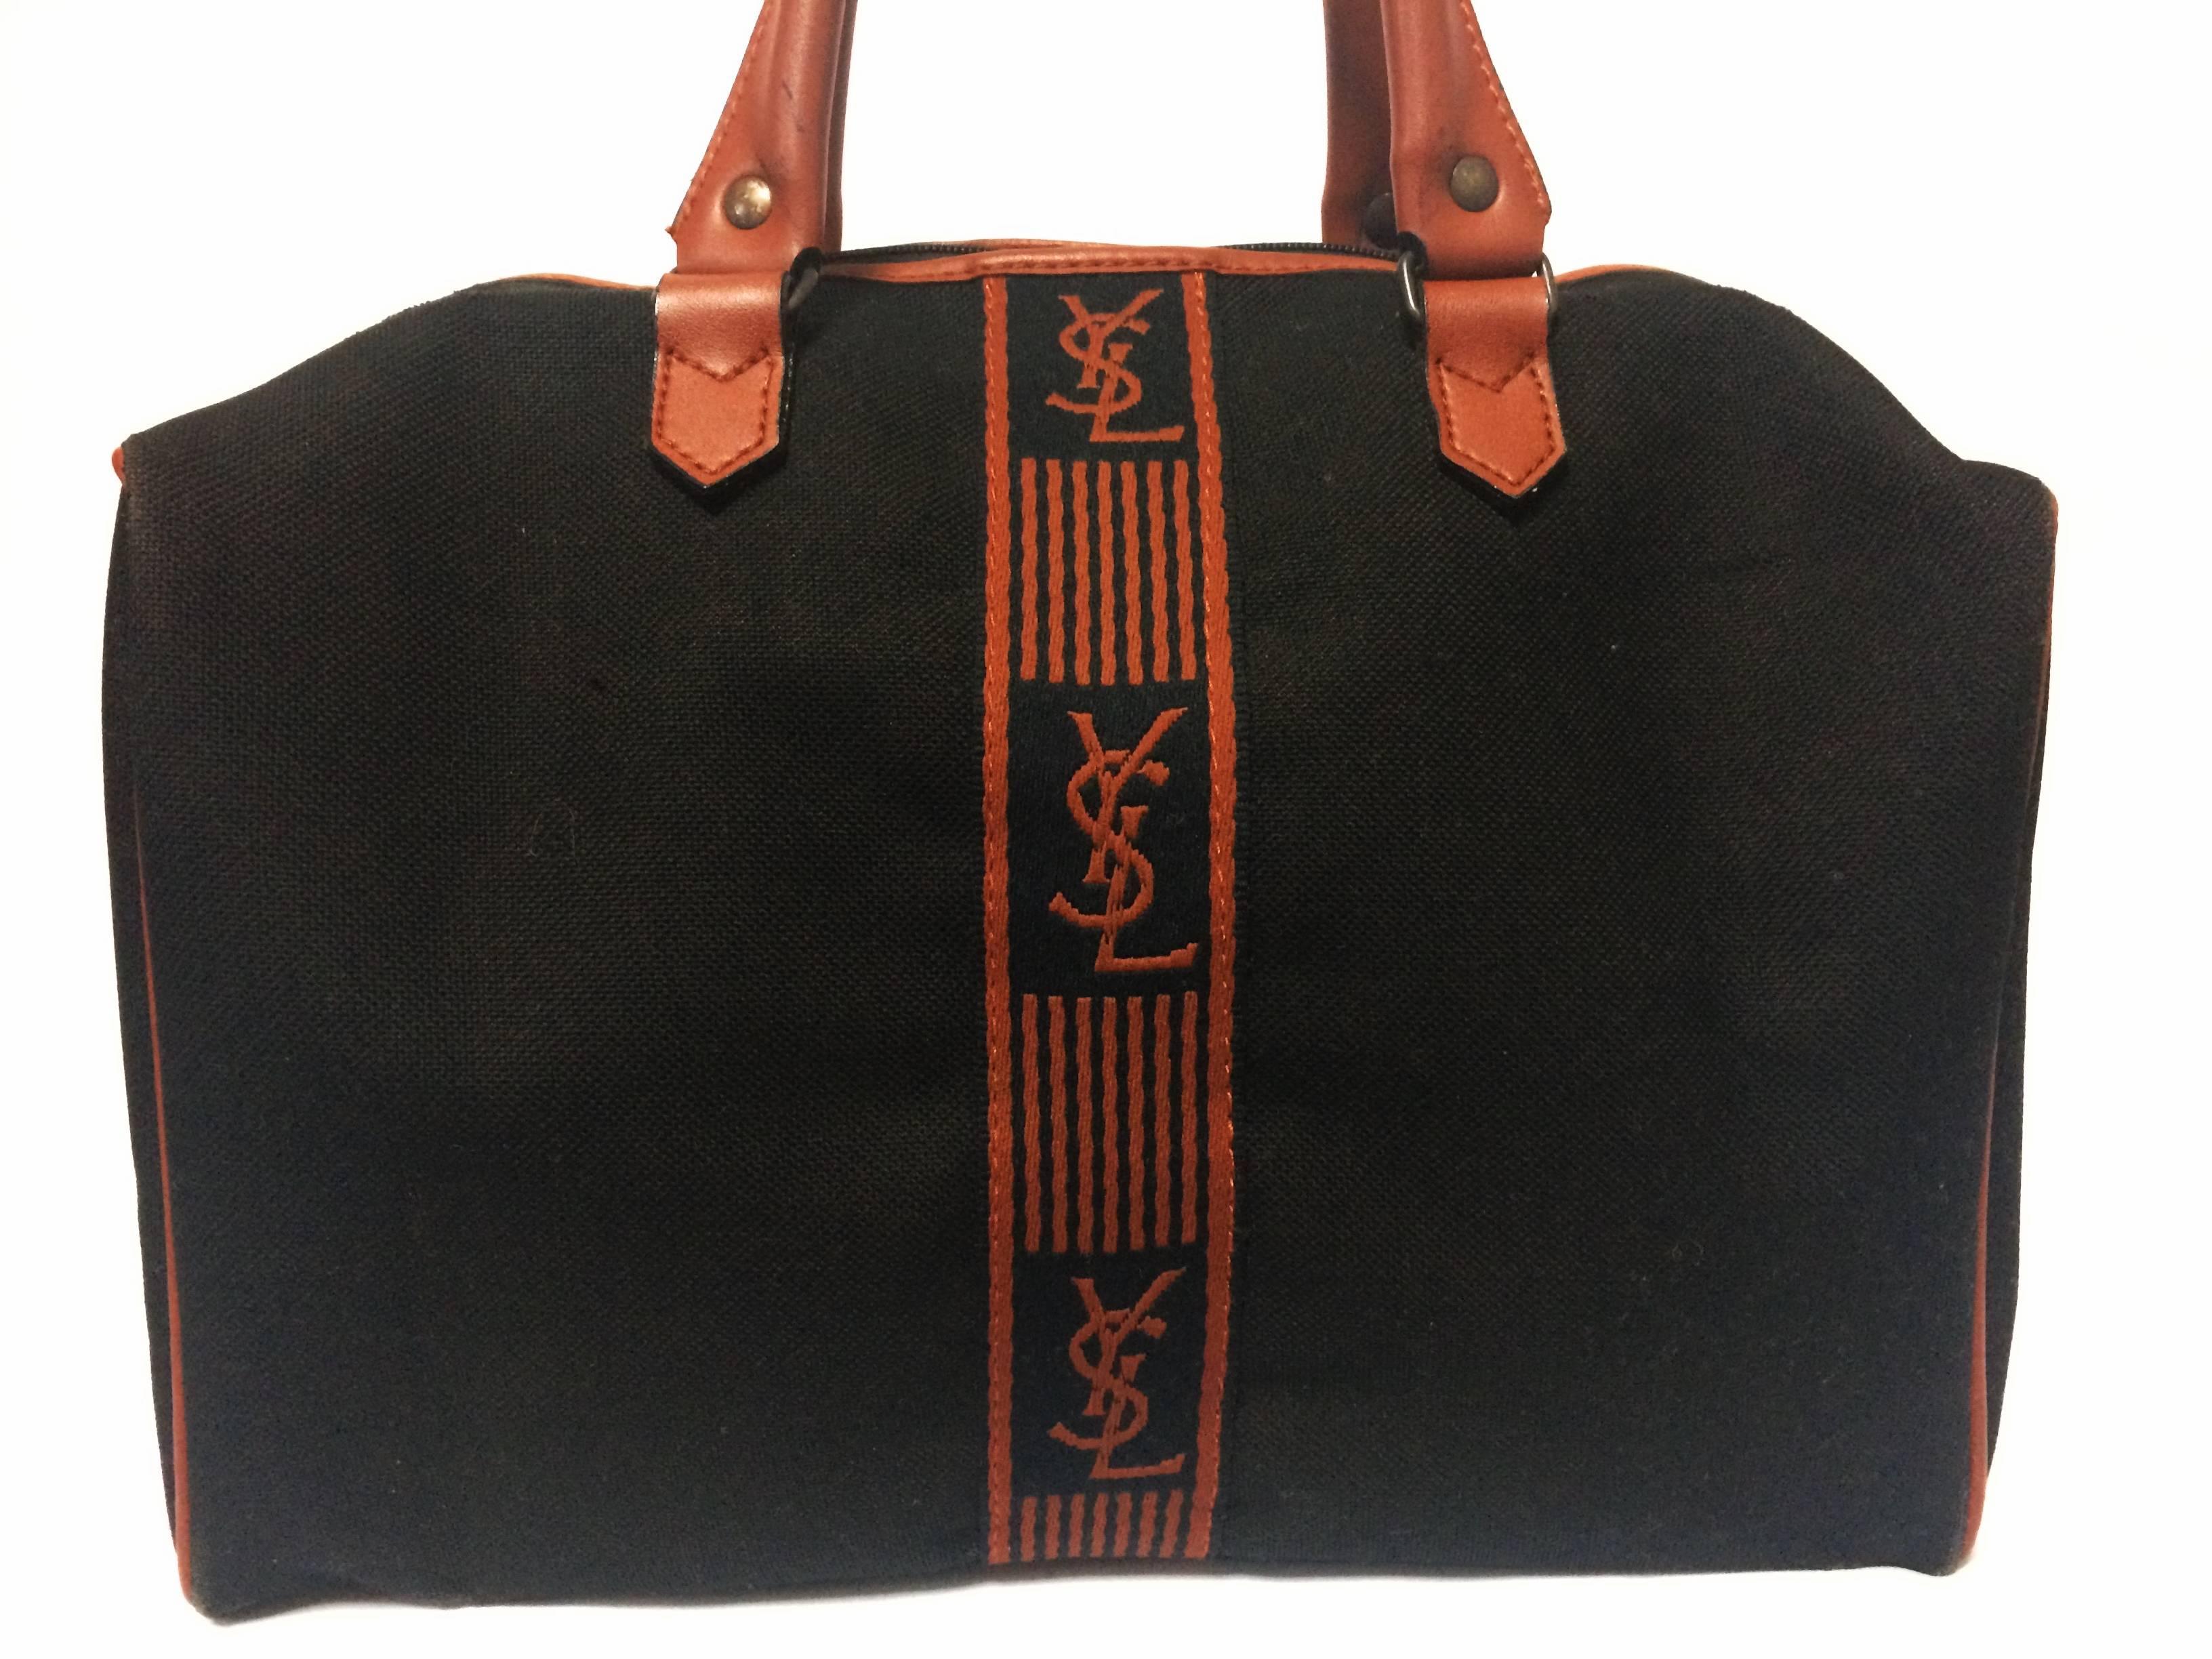 1980s. Vintage Yves Saint Laurent black canvas duffle handbag, mini travel bag with brown trimmings and YSL logo. Unisex purse for daily use. 

Introducing another vintage bag for unisex use from YSL, Yves Saint Laurent back in the late 80's to